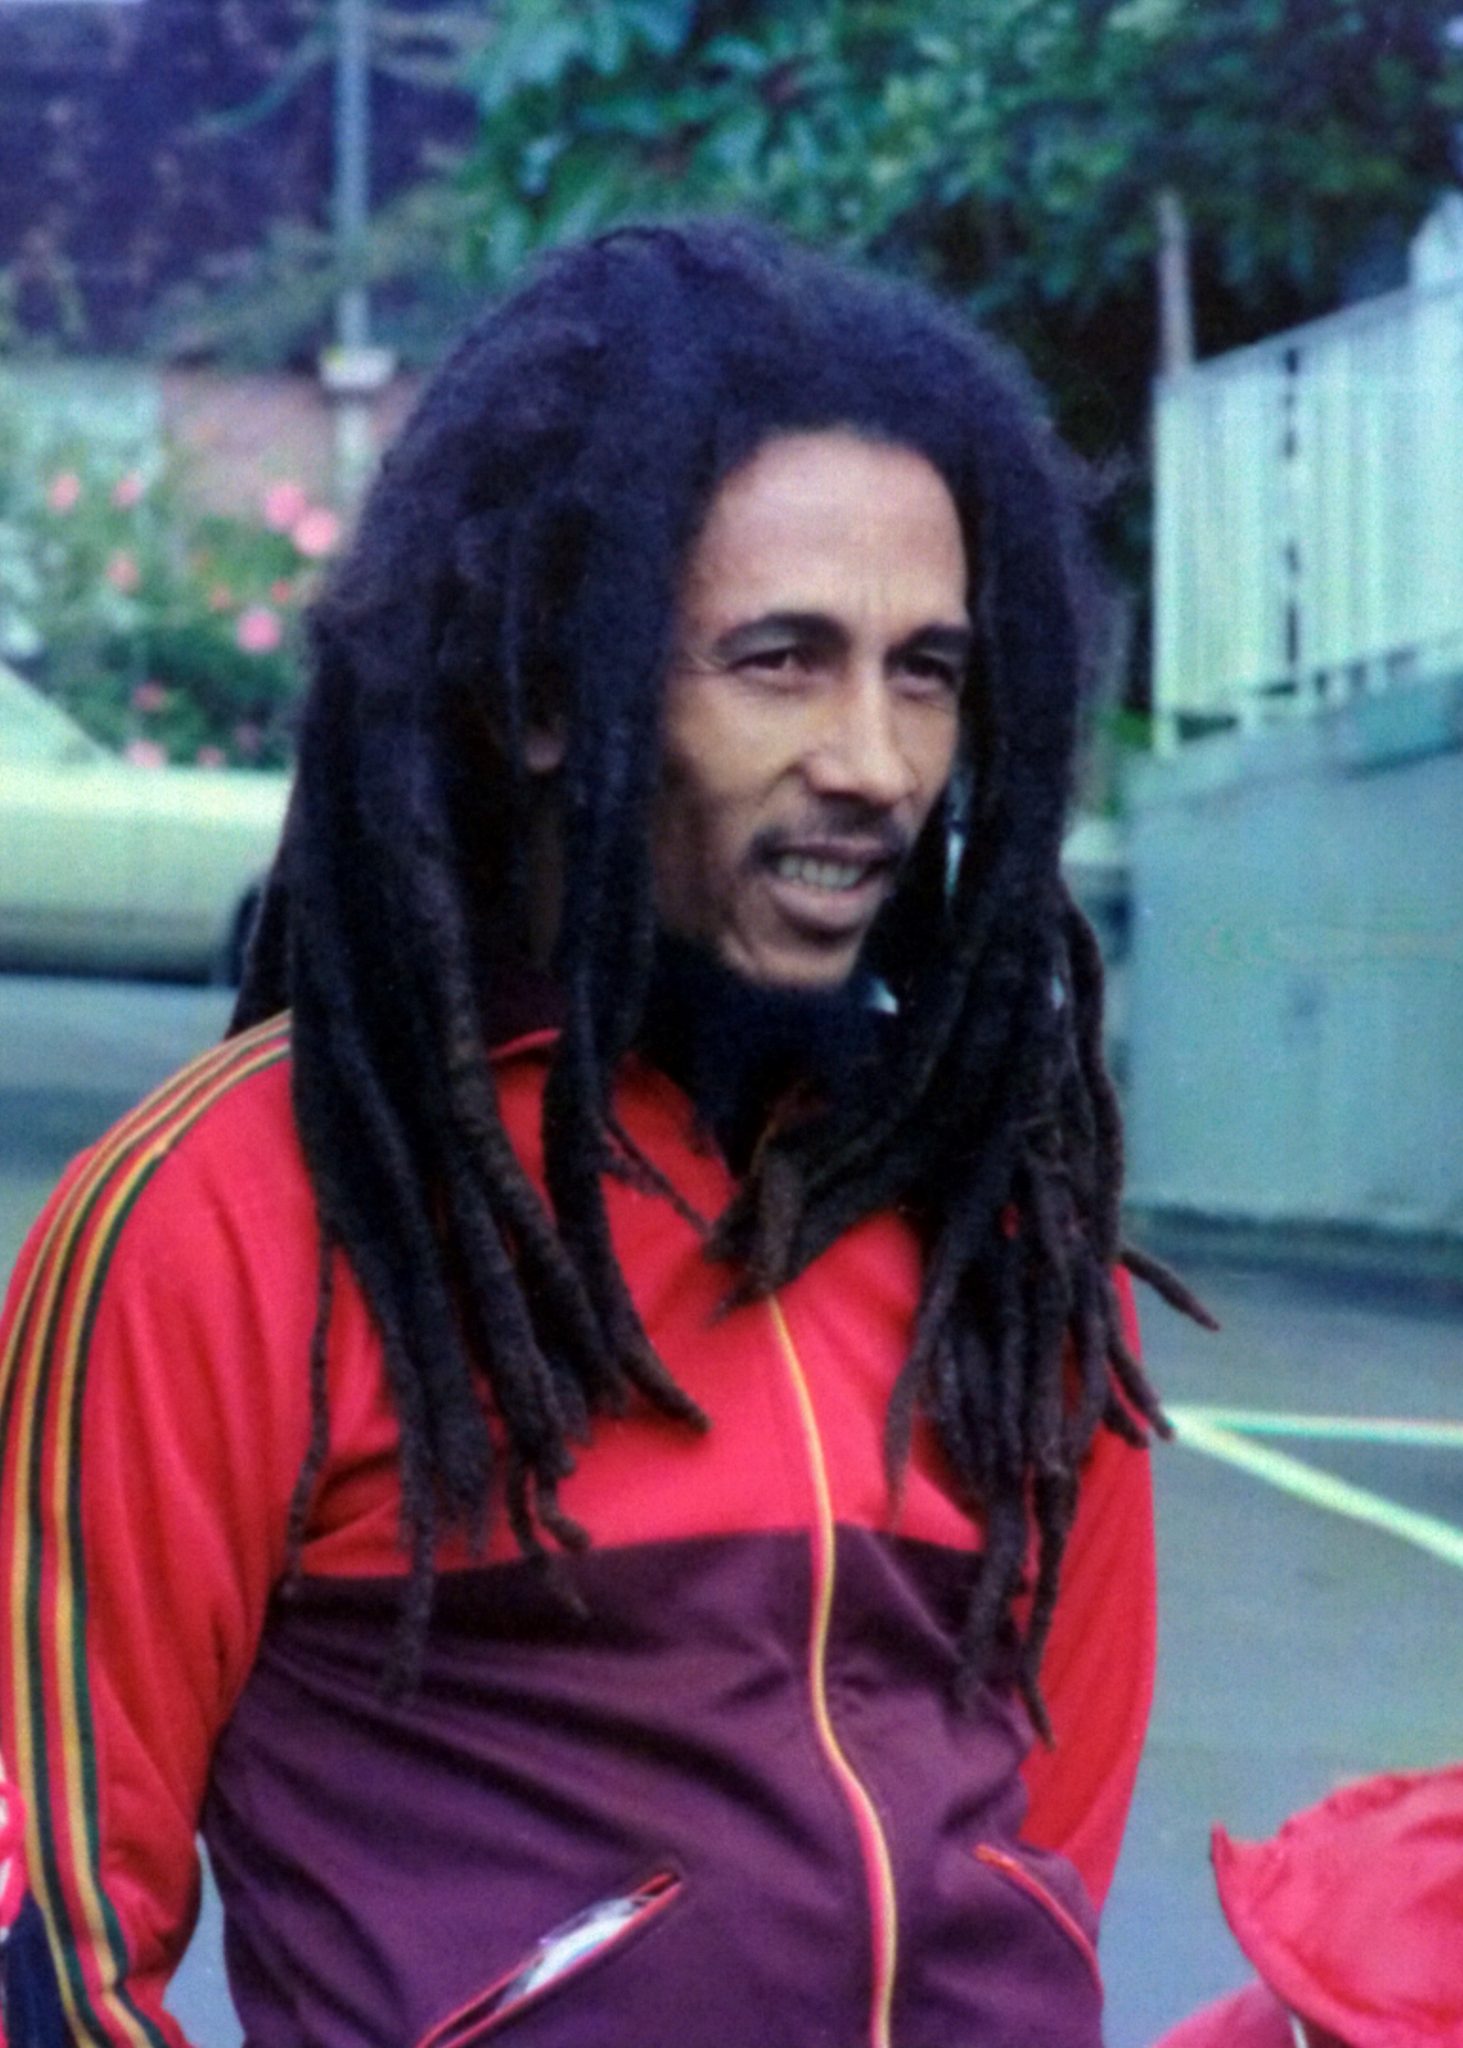 Bob Marley – A Music Legend that Changed the World Forever